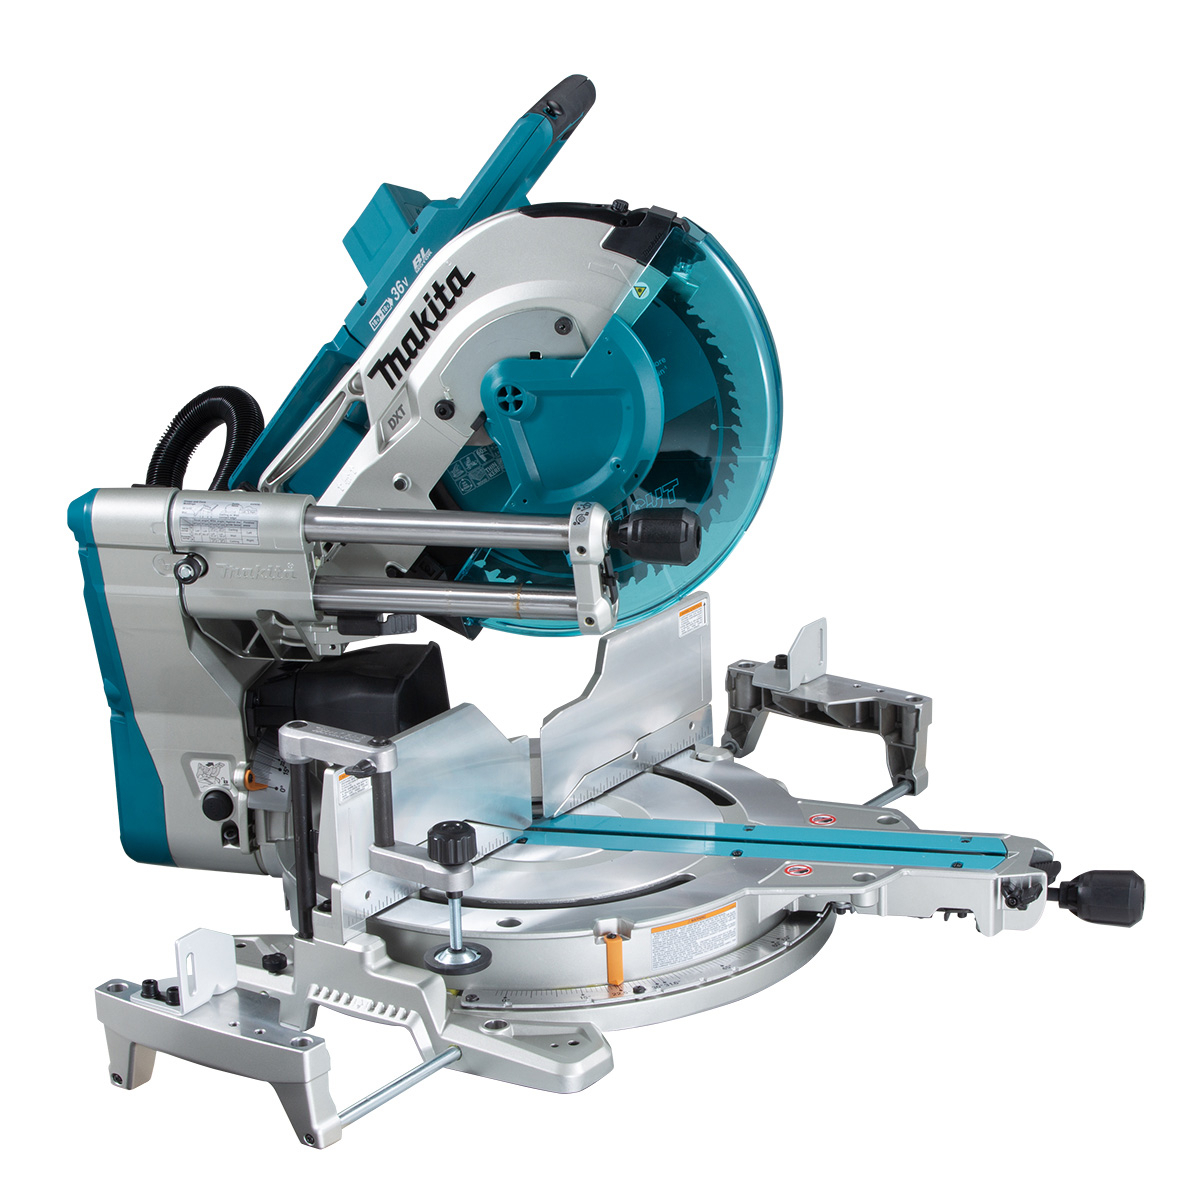 Makita 18Vx2 305mm (12") Brushless Slide Mitre Saw (AWS Compatible) (tool only) DLS211Z